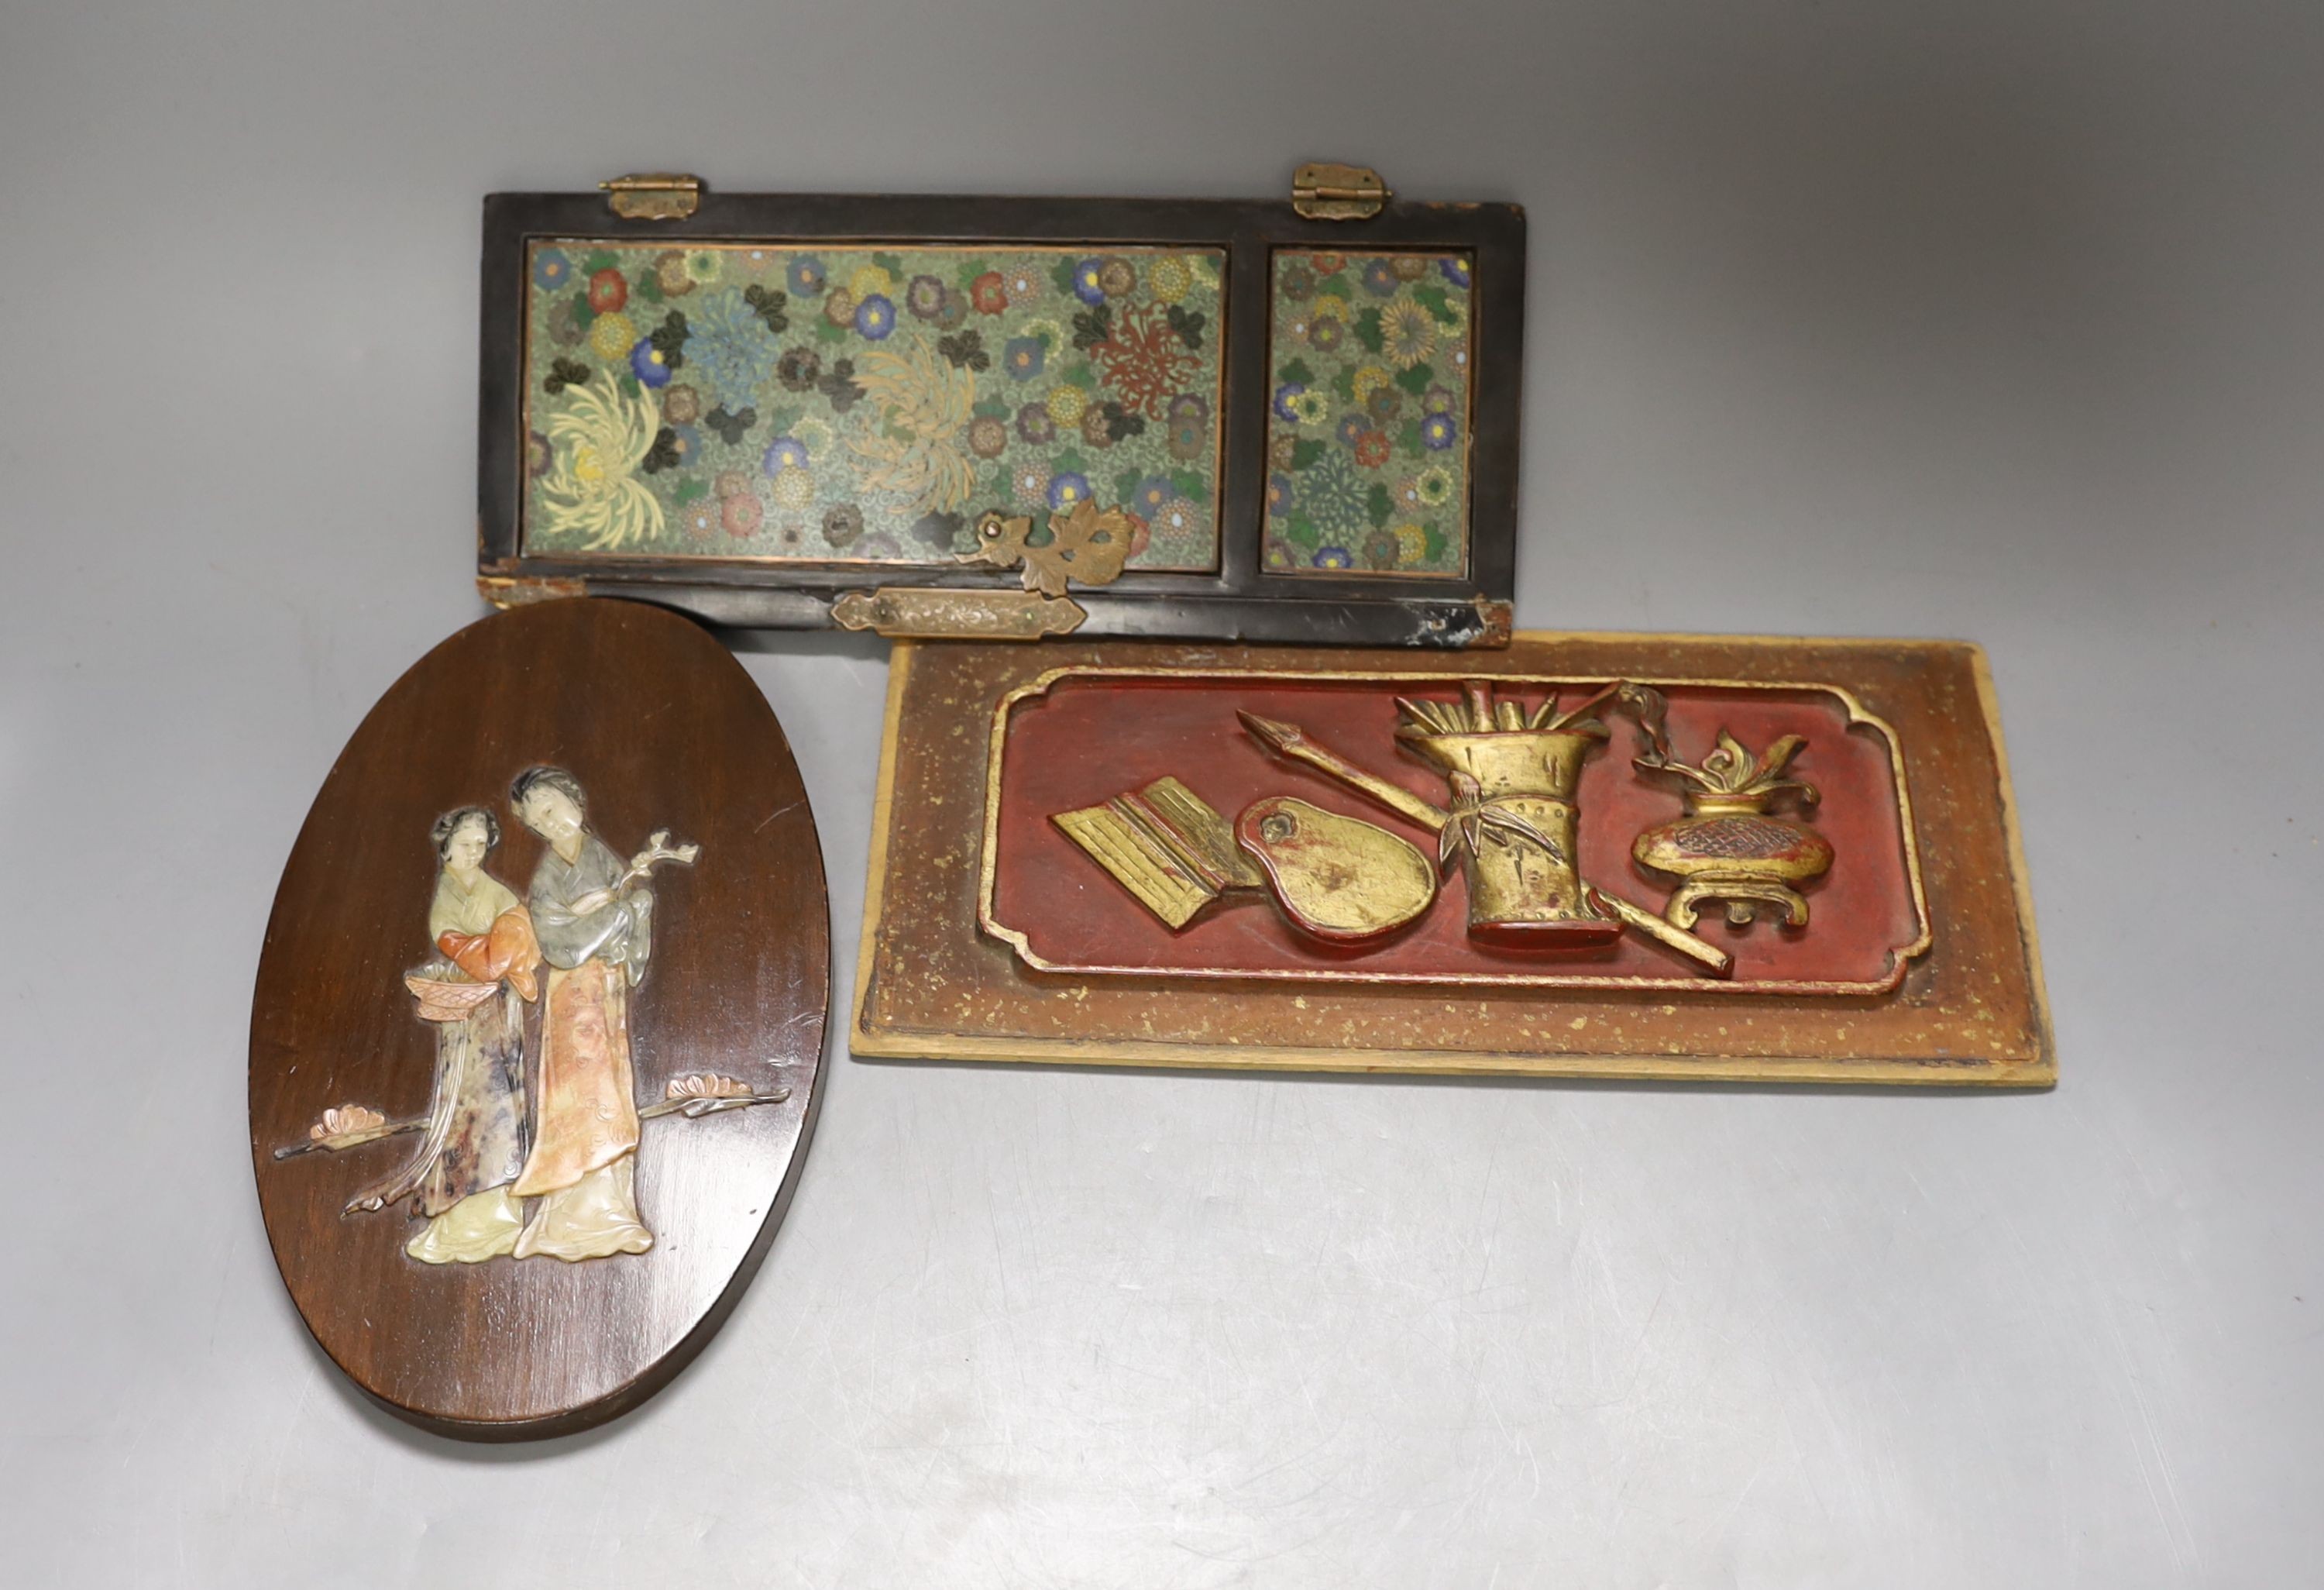 A Japanese Cloisonné enamel panelled cabinet door, 25.5 cm high, a Chinese lacquered wood panel, 26.5 X 12 cm and a Chinese soapstone in laid hardwood panel depicting two ladies, 20 cm high